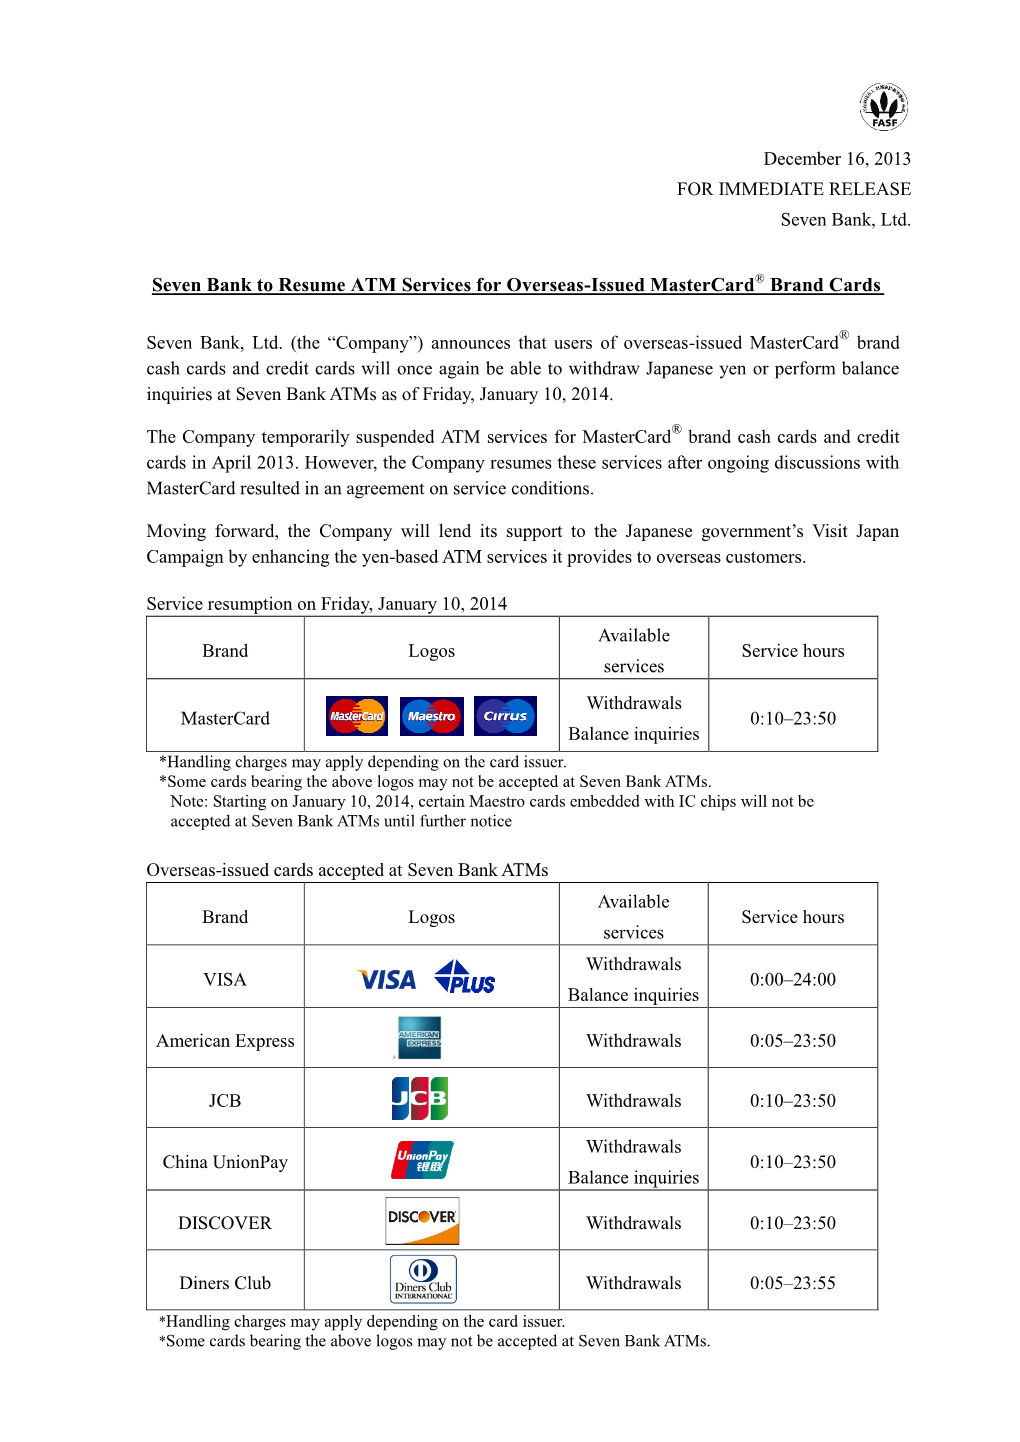 Seven Bank to Resume ATM Services for Overseas-Issued Mastercard® Brand Cards